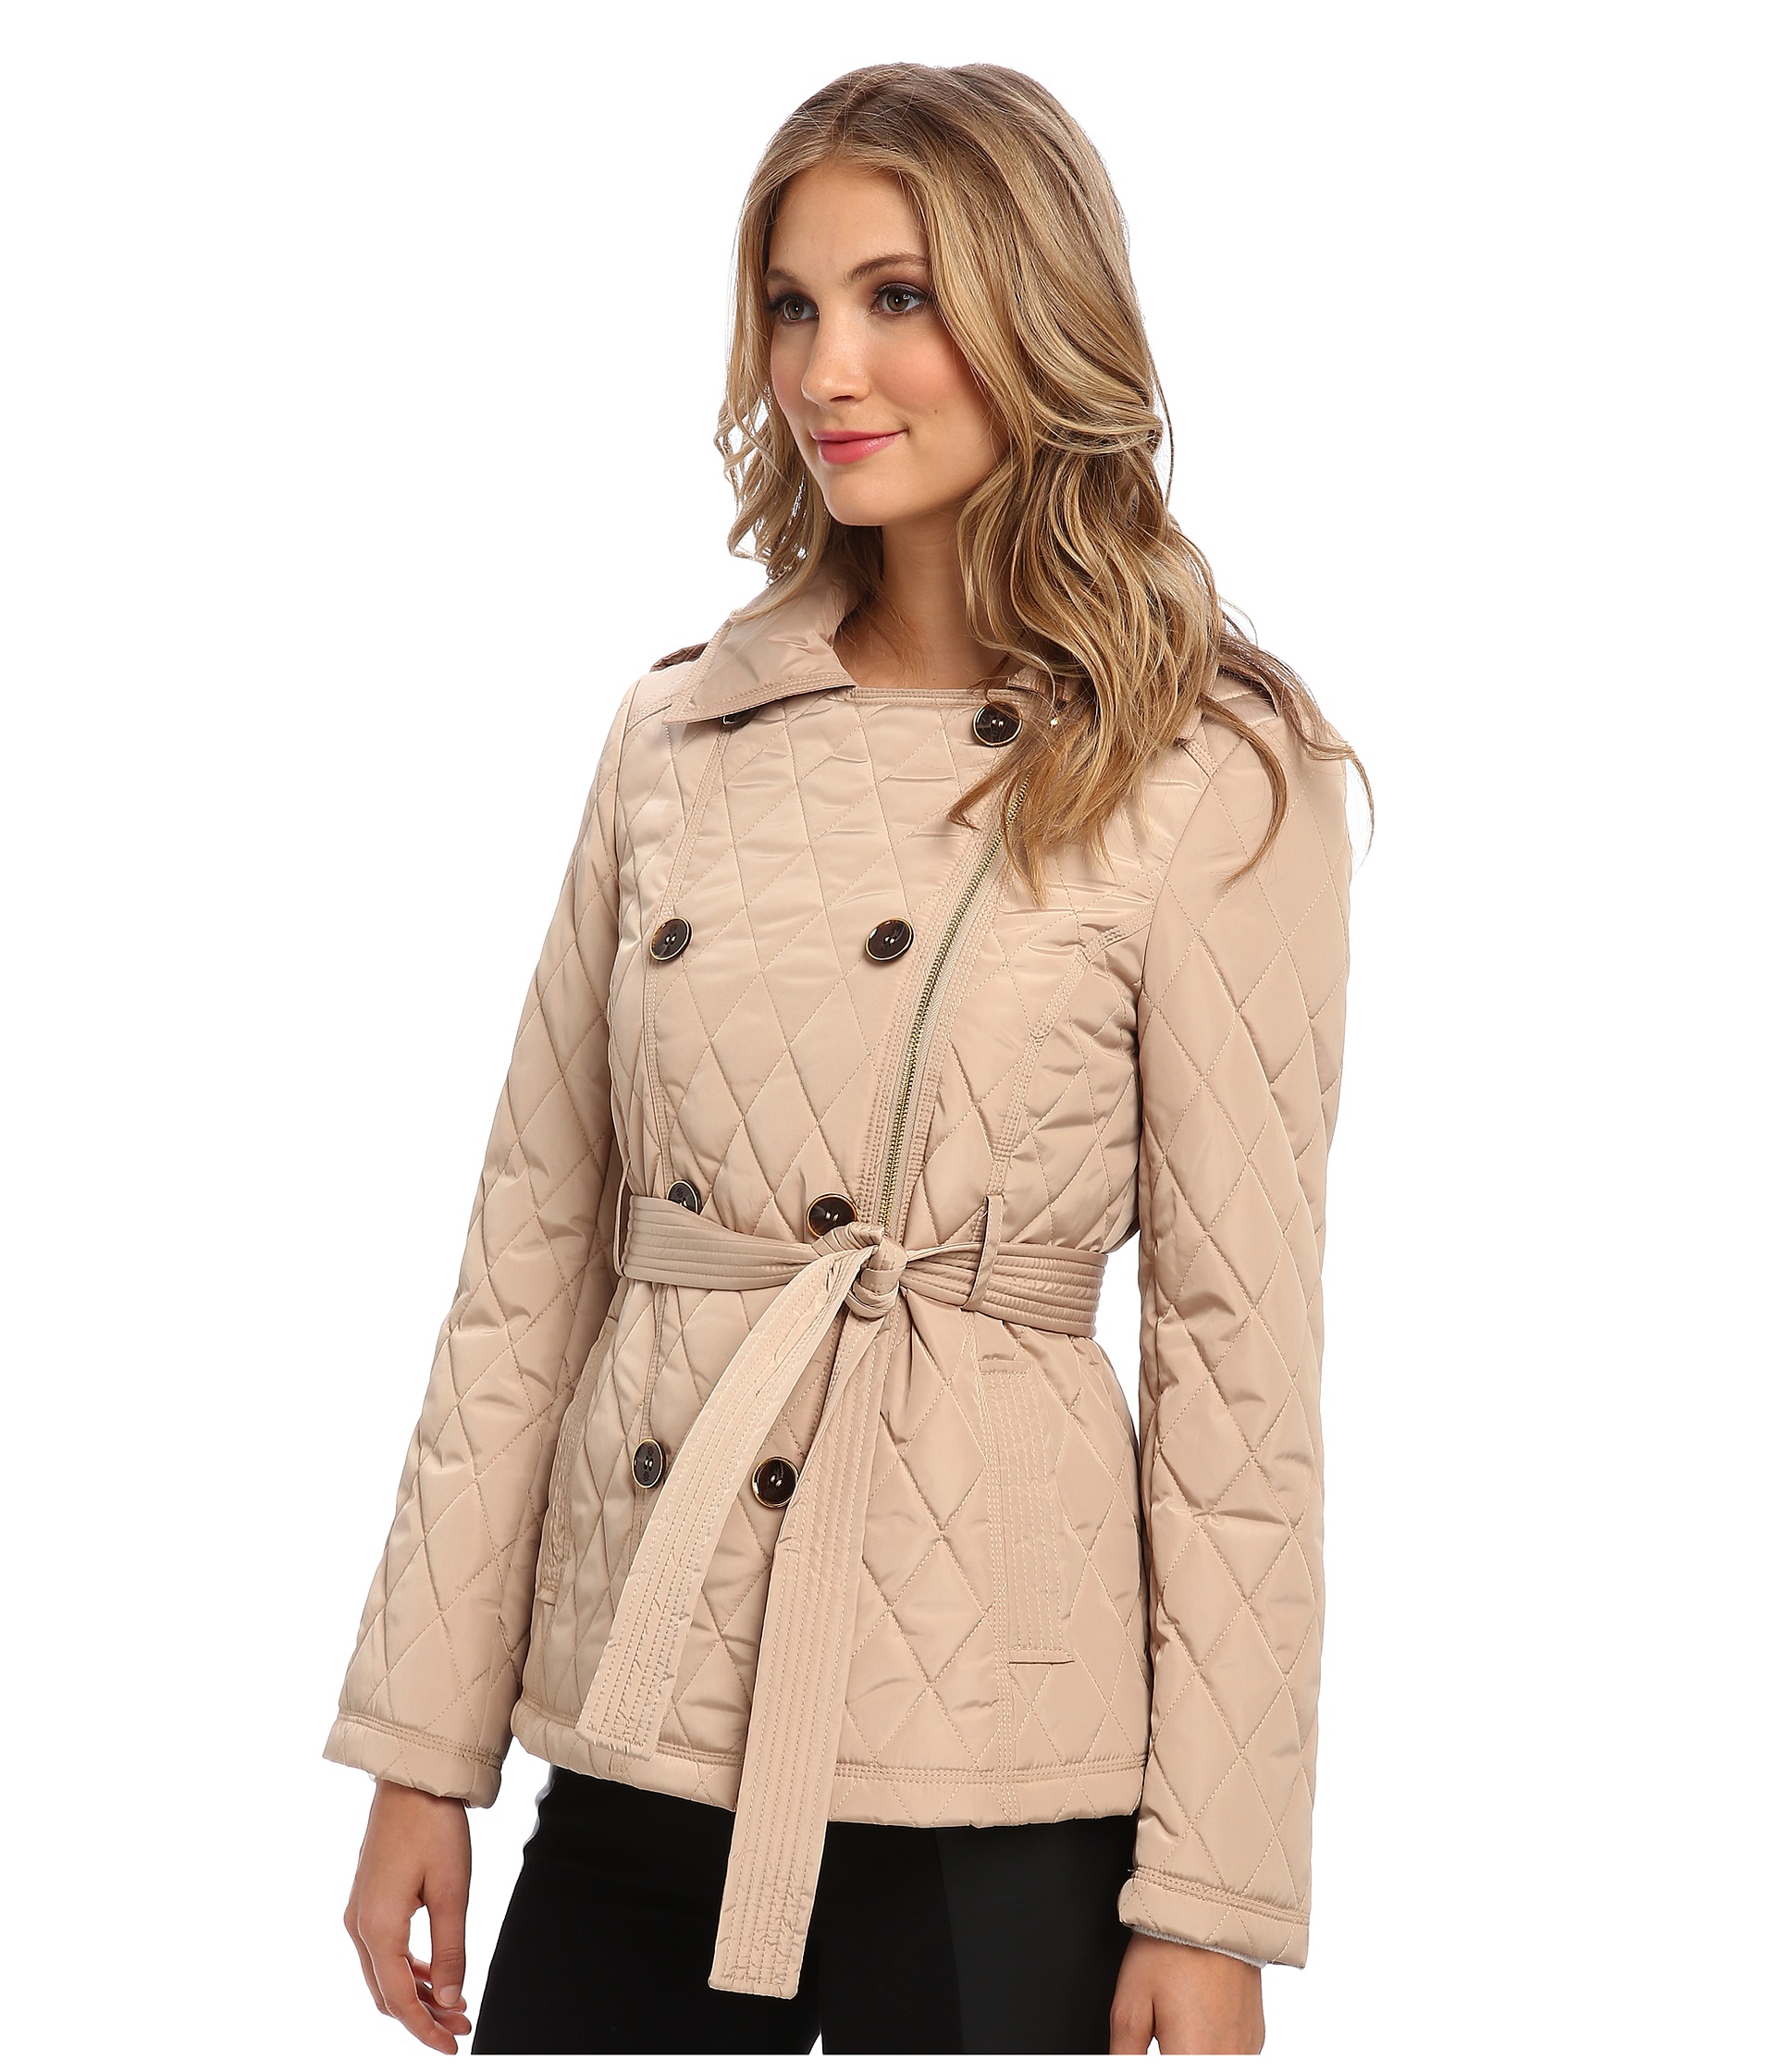 Jessica Simpson Jofmp762 Coat Champagne, Clothing, Women | Shipped Free at Zappos1920 x 2240